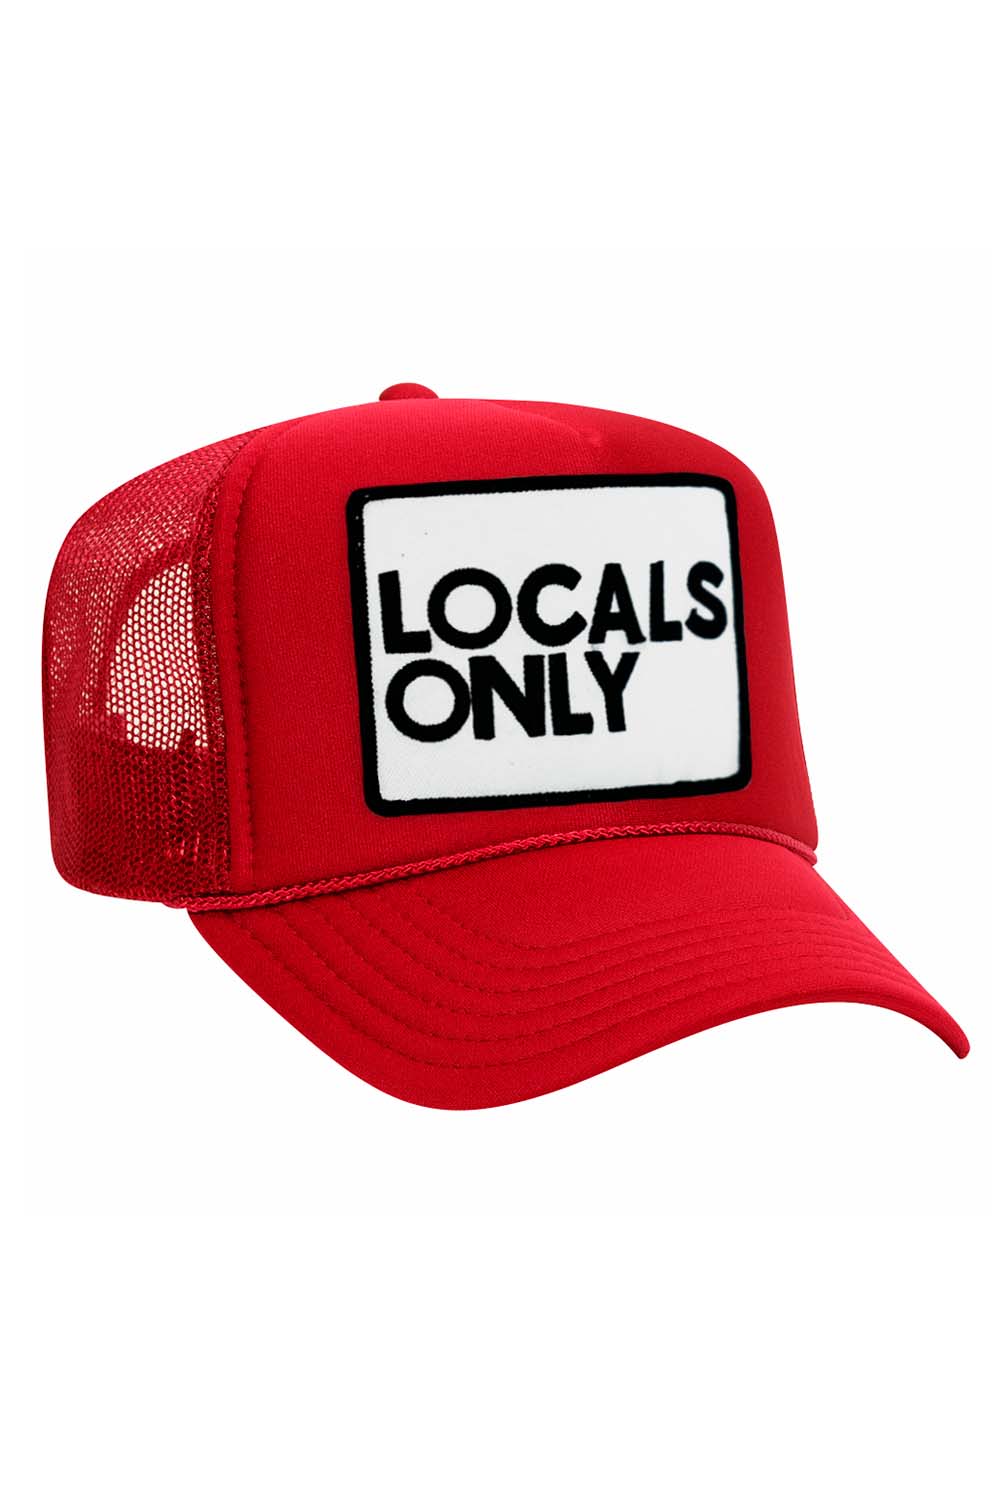 LOCALS ONLY VINTAGE TRUCKER HAT HATS Aviator Nation OS RED 